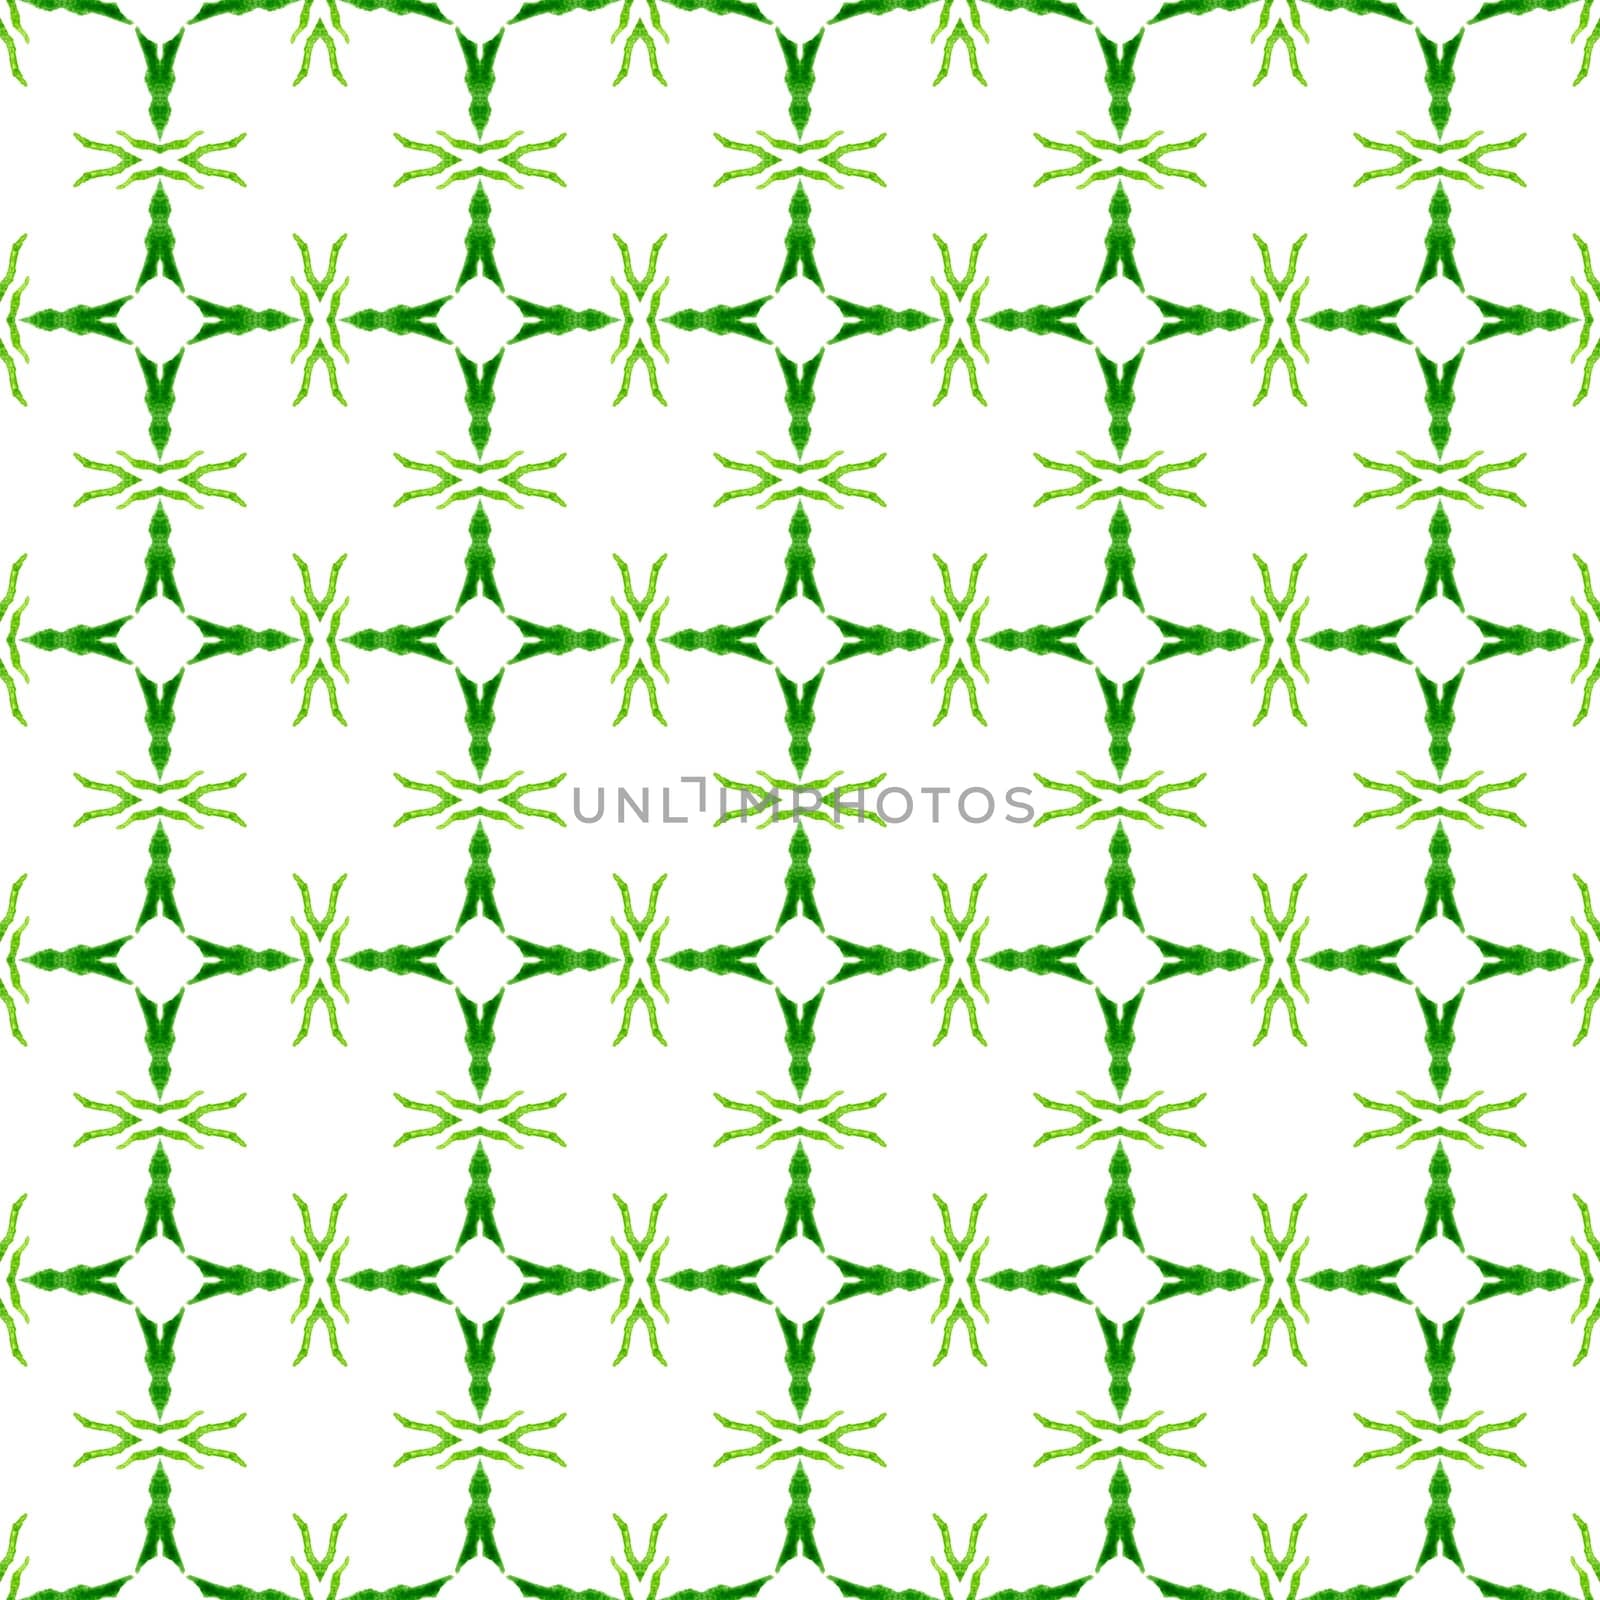 Textile ready delightful print, swimwear fabric, wallpaper, wrapping. Green mesmeric boho chic summer design. Hand painted tiled watercolor border. Tiled watercolor background.